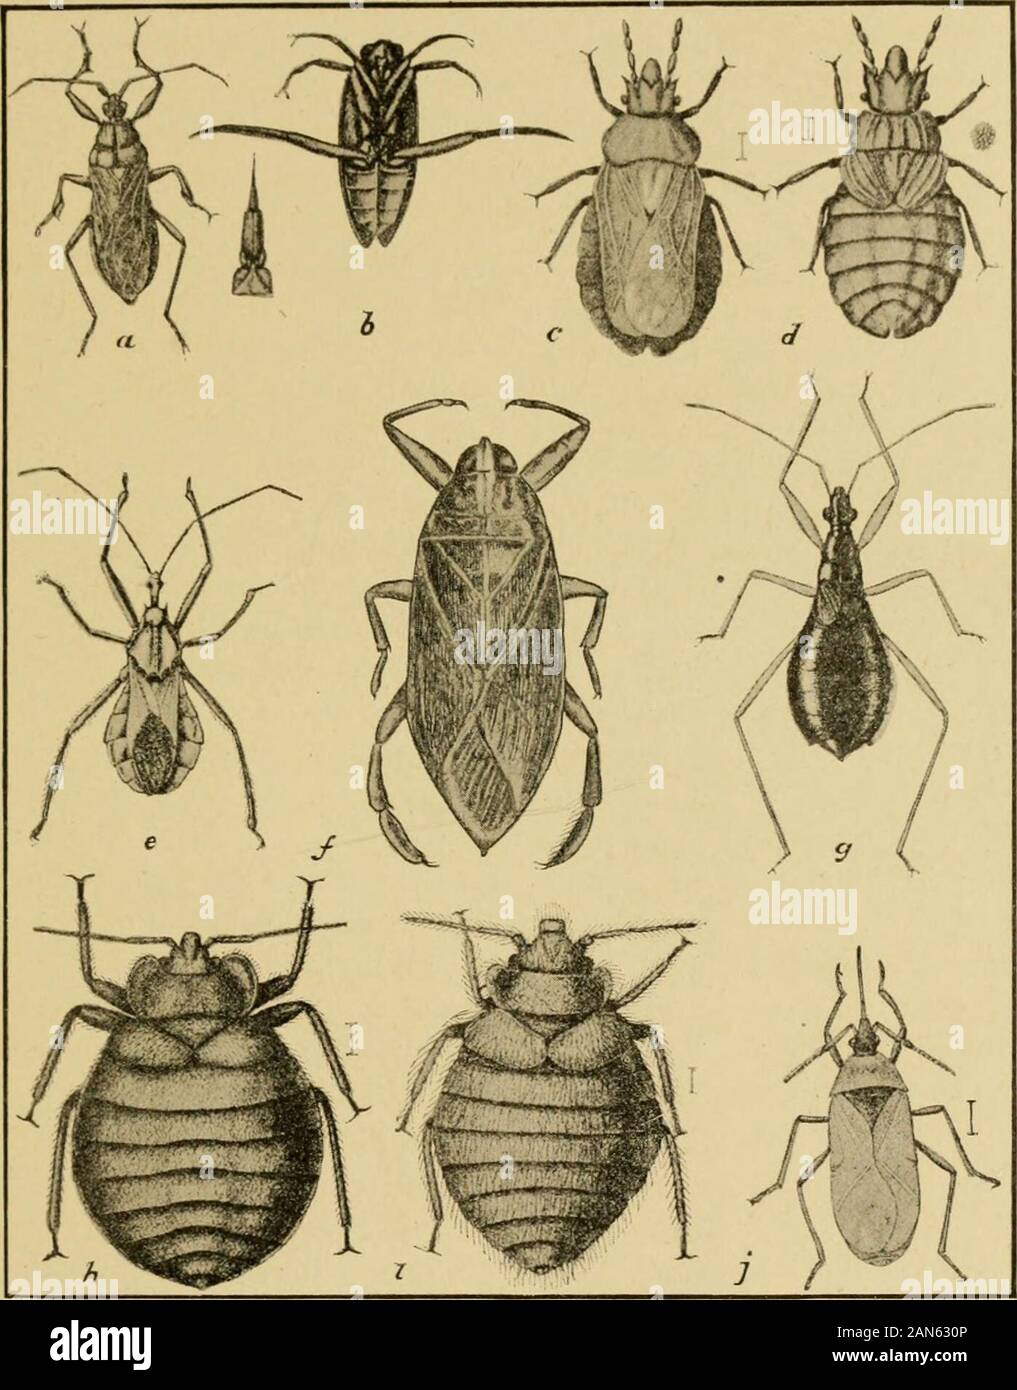 Handbook of medical entomology . 17. Salivary glands ofNotonecta maculata.After Bugnion andPopoff. Hemiptera, or True Bugs 29 Accessory to the salivary apparatus there is on the ventral sideof the head, underneath the pharynx, a peculiar organ which the. 19. Heteroptera, (a) Melanolestes picipes; (b) Notonecta undulata; (c.d) Aradus robustus(c) adult, (d) nymph, much enlarged; (e) Arilus cristatus; (/) Belostoma americana;(g) Nabis (Coriscus) subcoleoptratus, enlarged; (/») Cimex lectularius, (») Oeciacusvicarius, much enlarged; (j) Lyctocoris fitchii, much enlarged After Lugger. Germans have Stock Photo